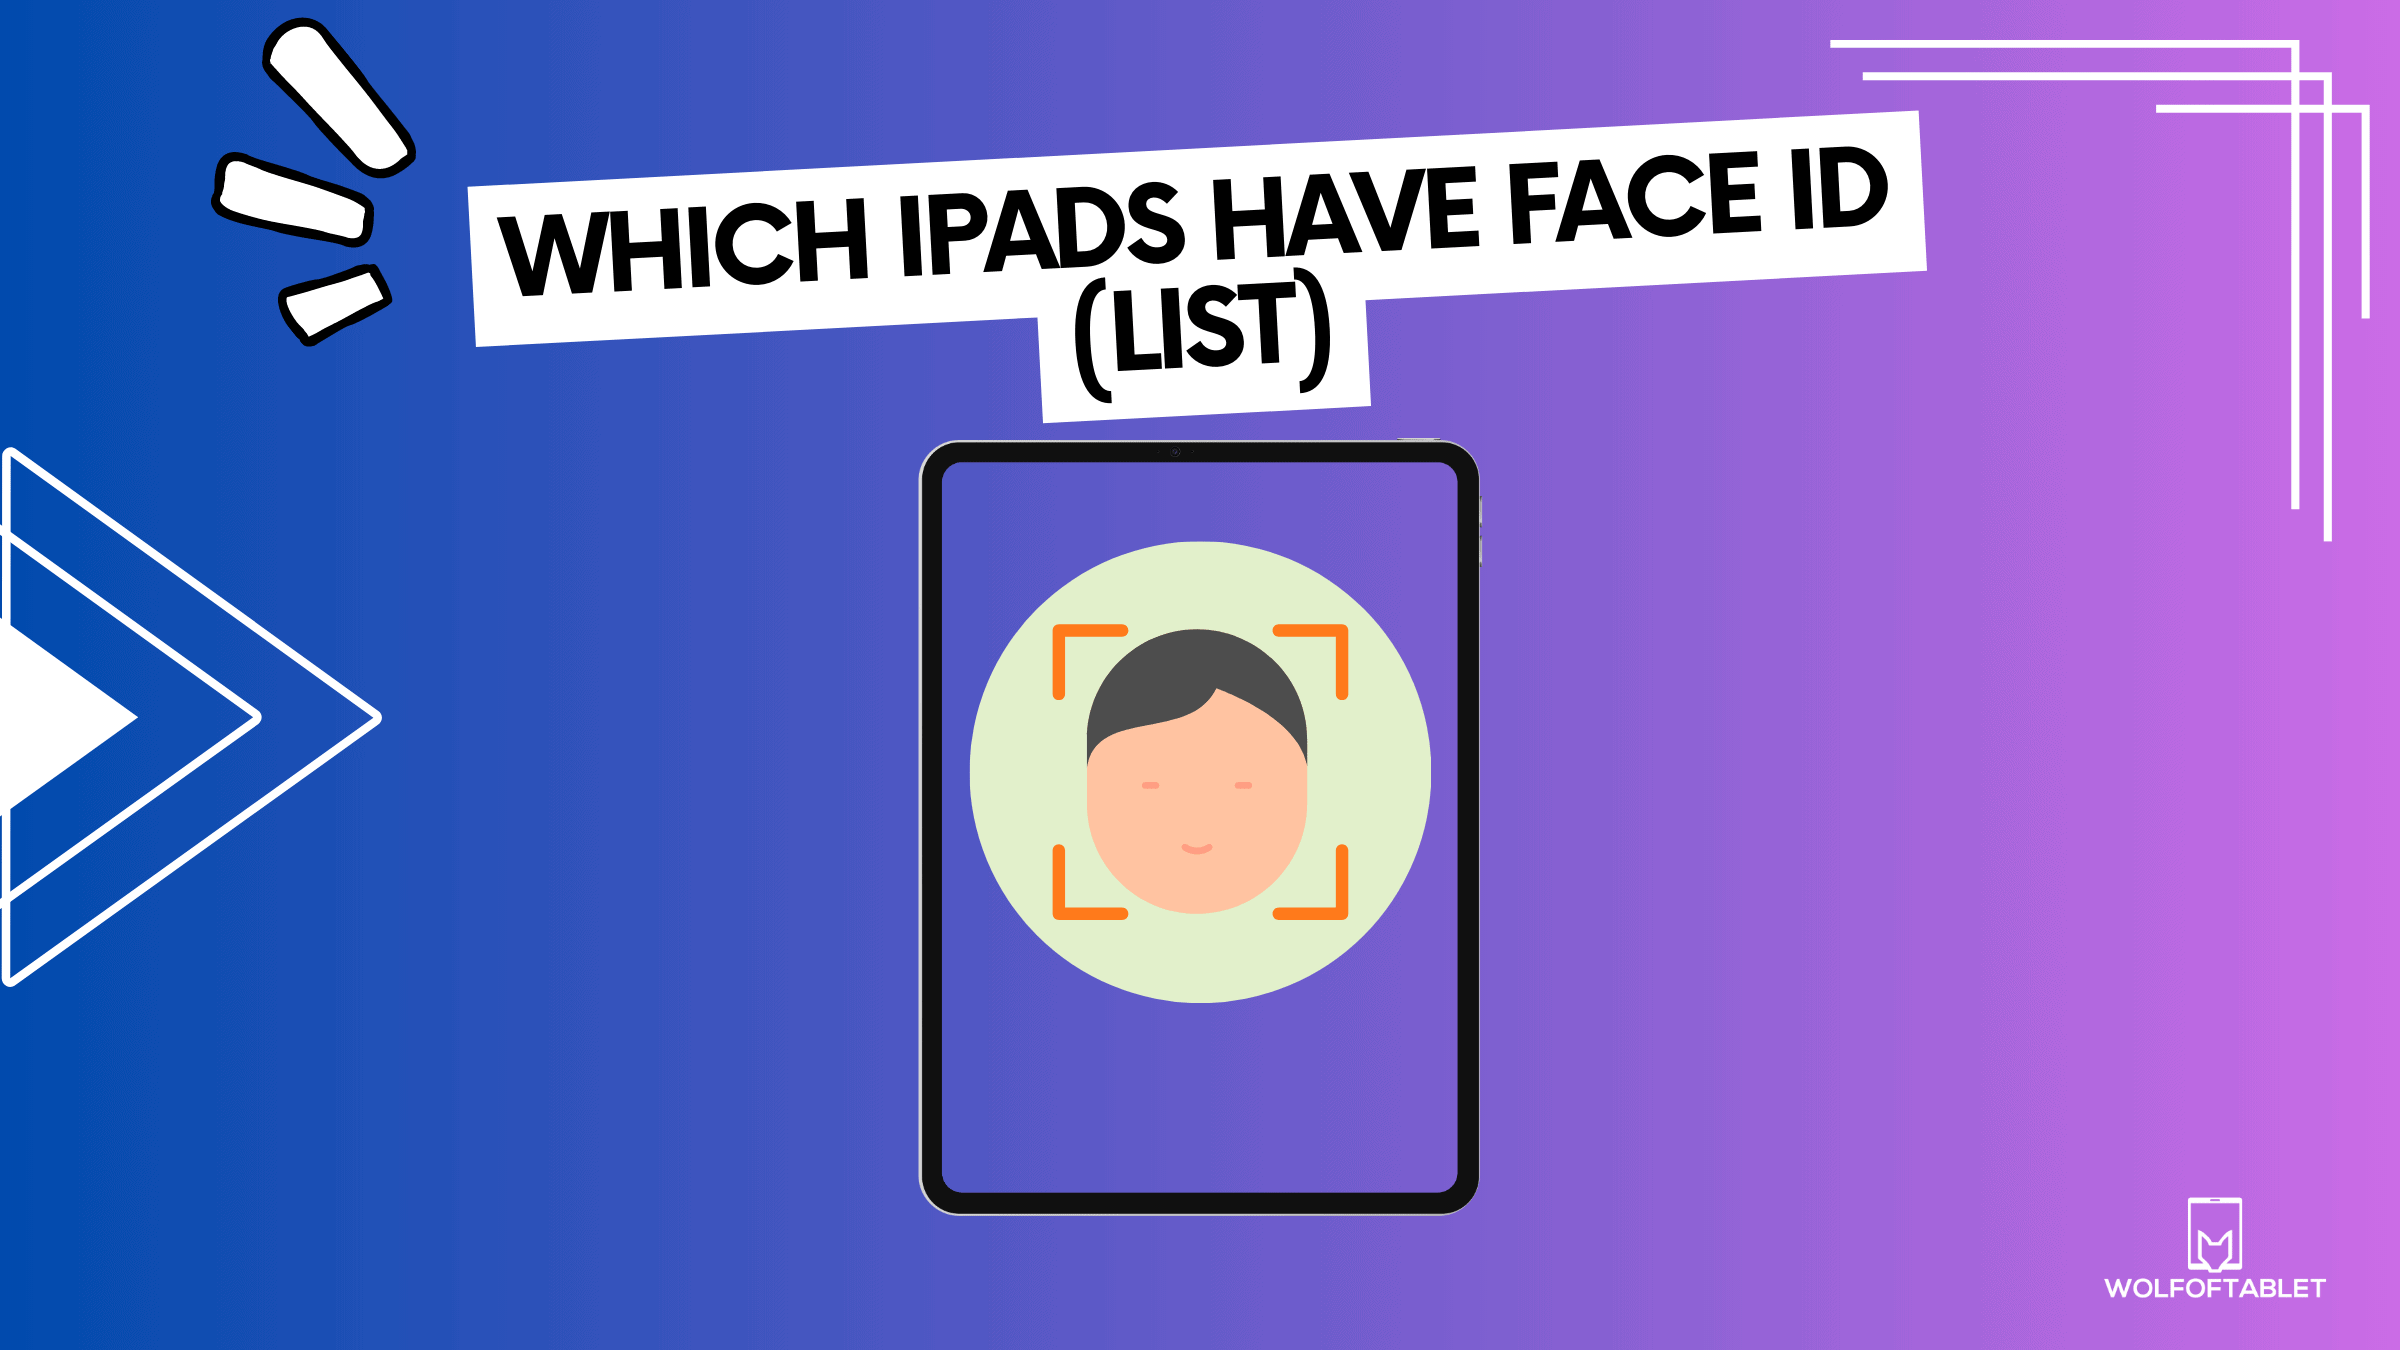 which ipads have face id - full list and why this feature isn't on other ipads